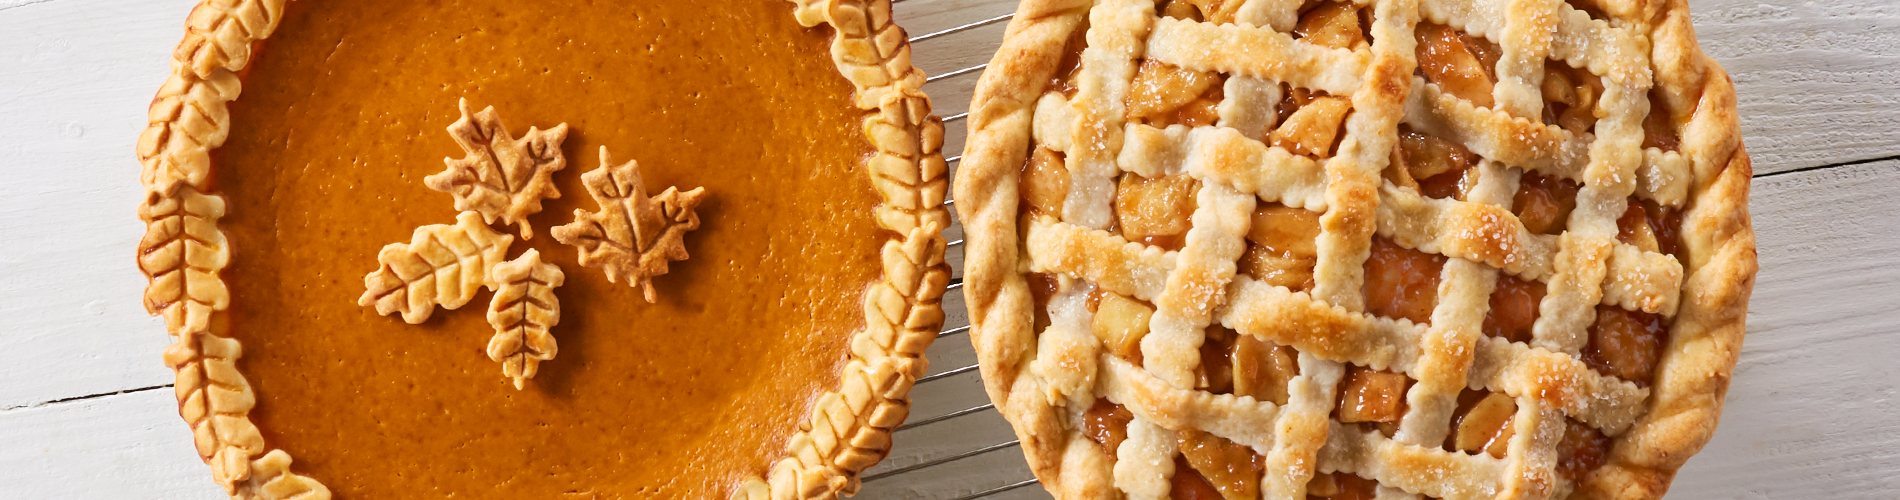 How to protect a pie crust from burning